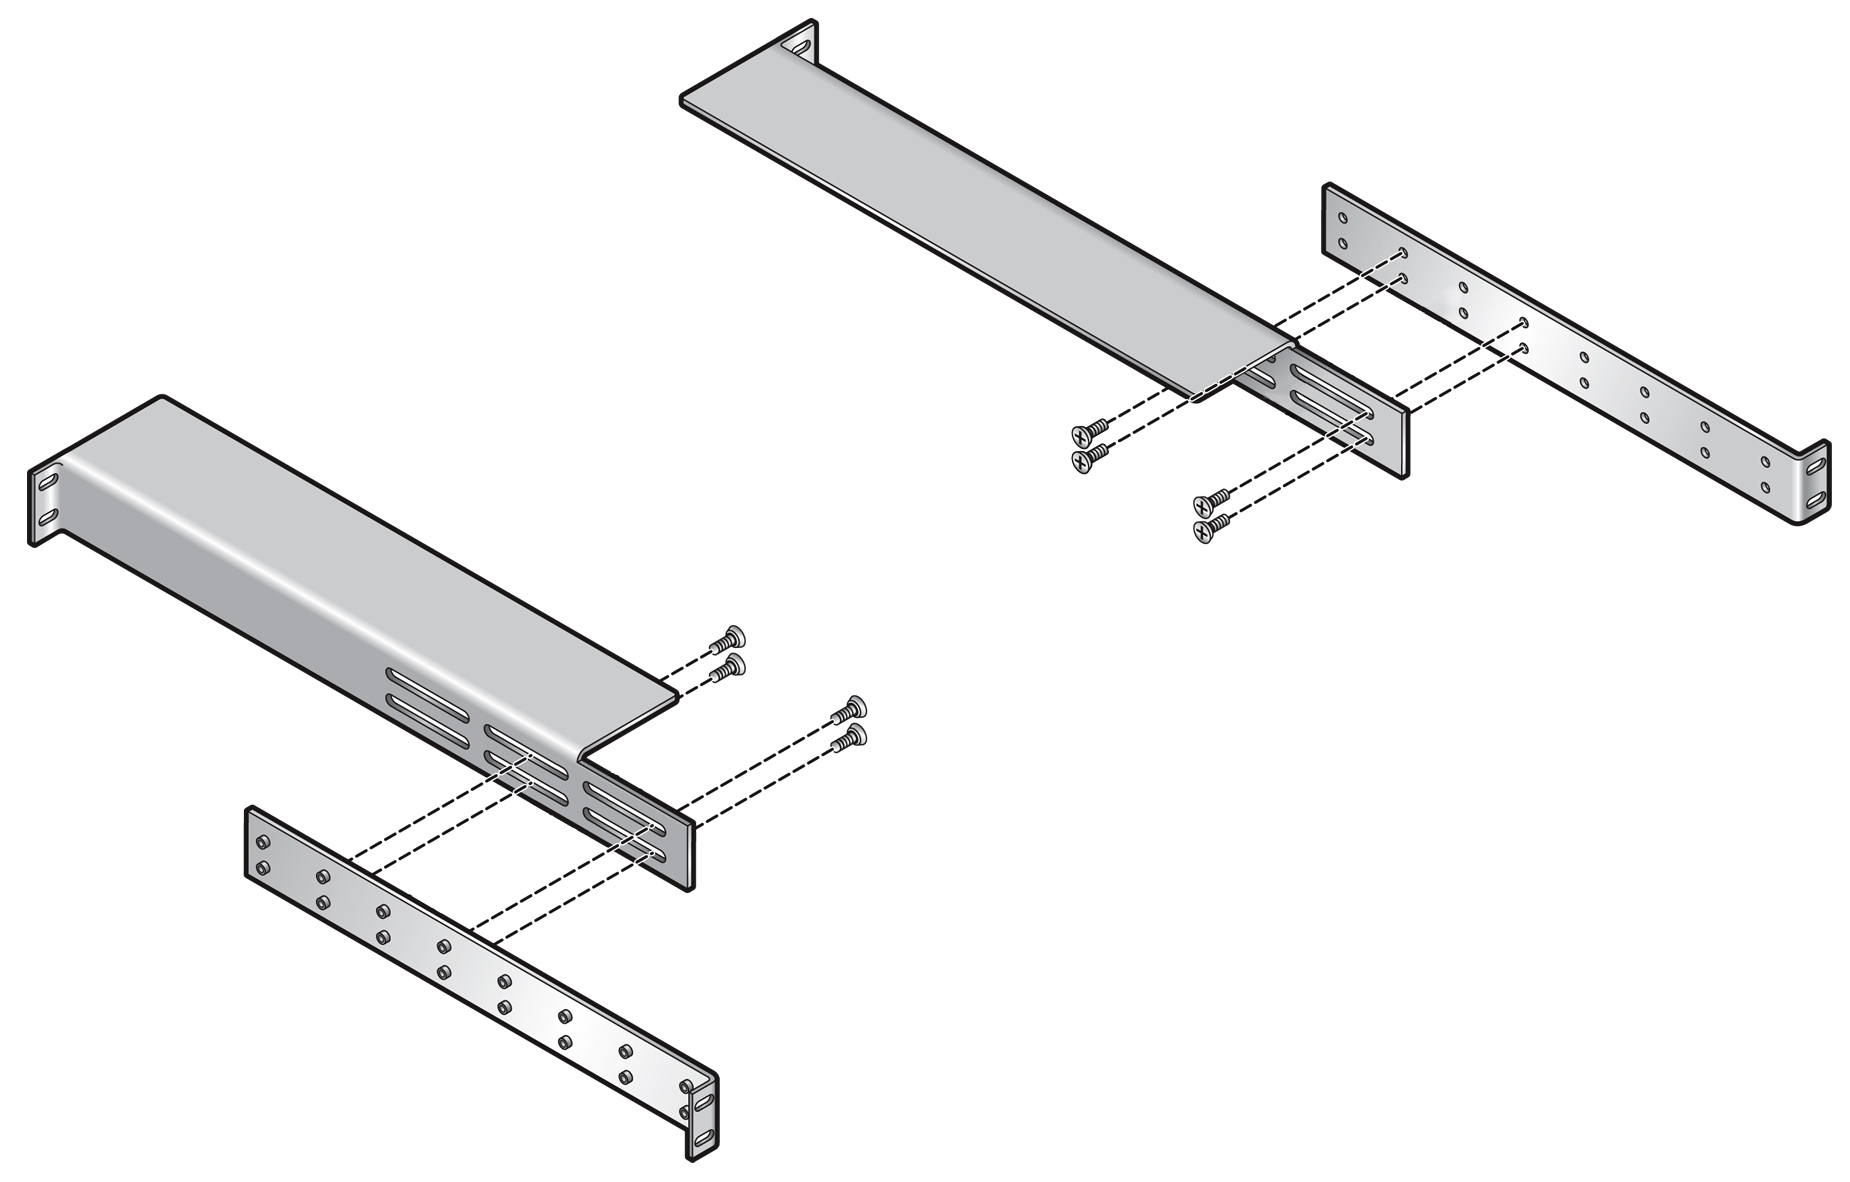 image:Figure shows each of the two rack mount rails has two                                     pieces, held together by four screws apiece.